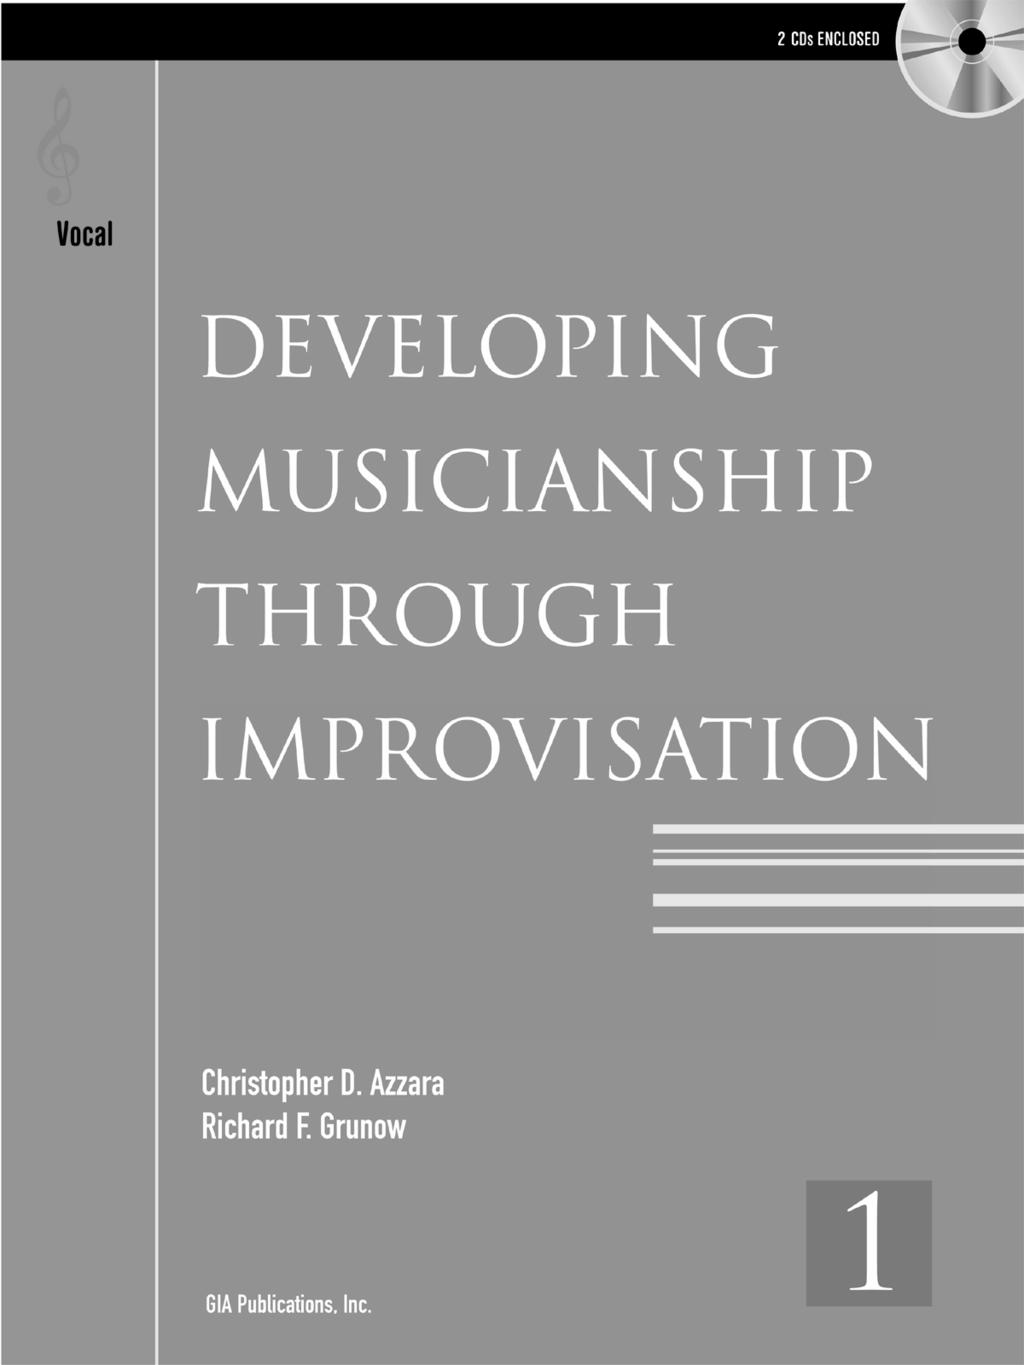 Handout 2/Jazz 12/13/06 11:44 AM Page 29 DEVELOPING MUSICIANSHIP THROUGH IMPROVISATION Christopher D. Azzara Richard. Gruno Learn to improvise ith this groundreaking, state-of-the-art ook and CD set!